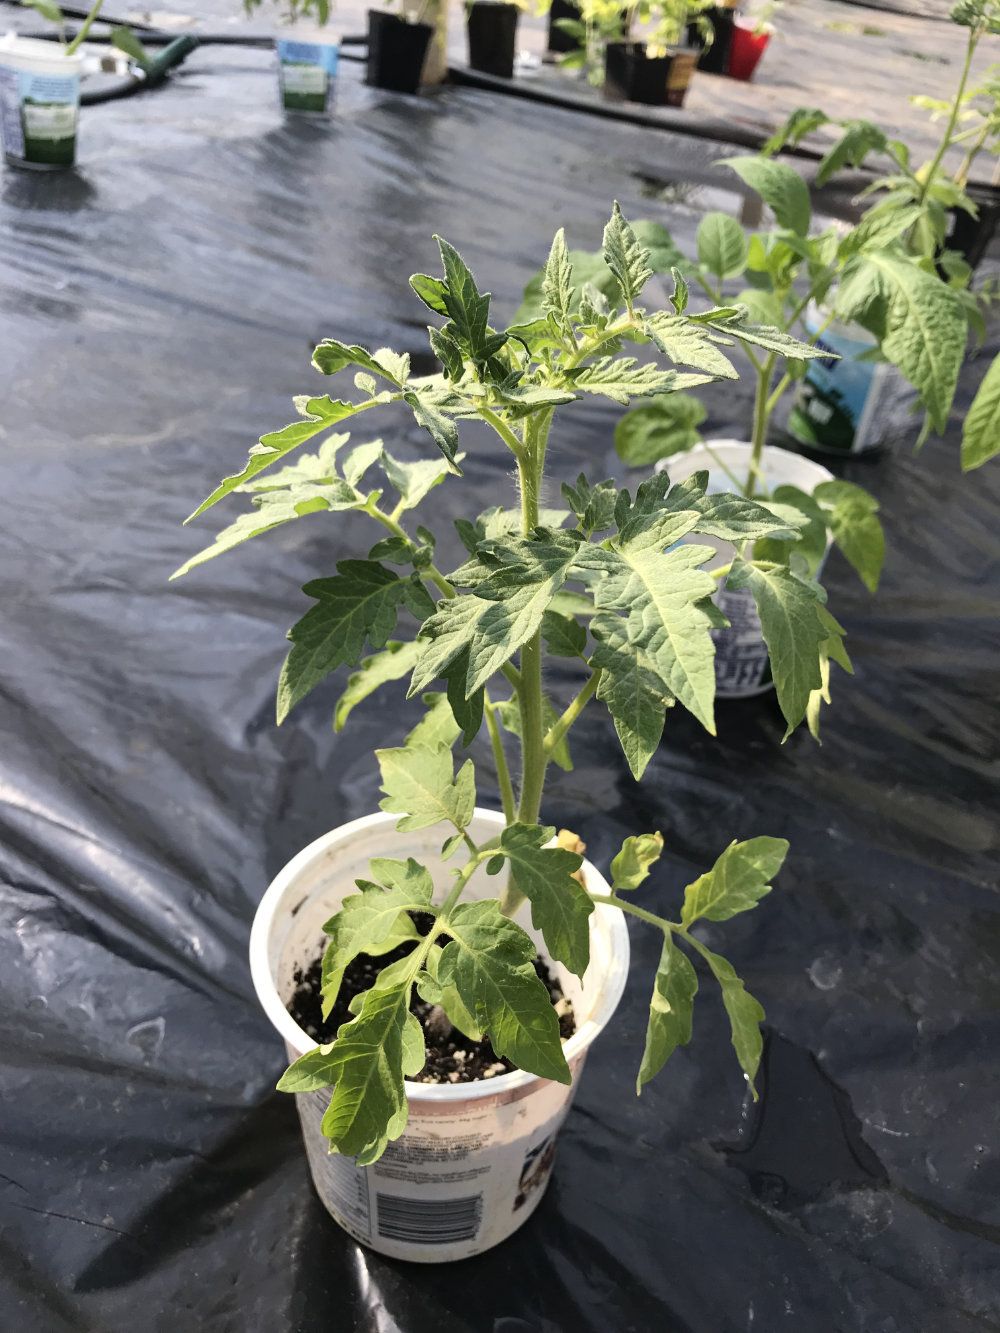 A young tomato plant sits in pot, ready to be planted.